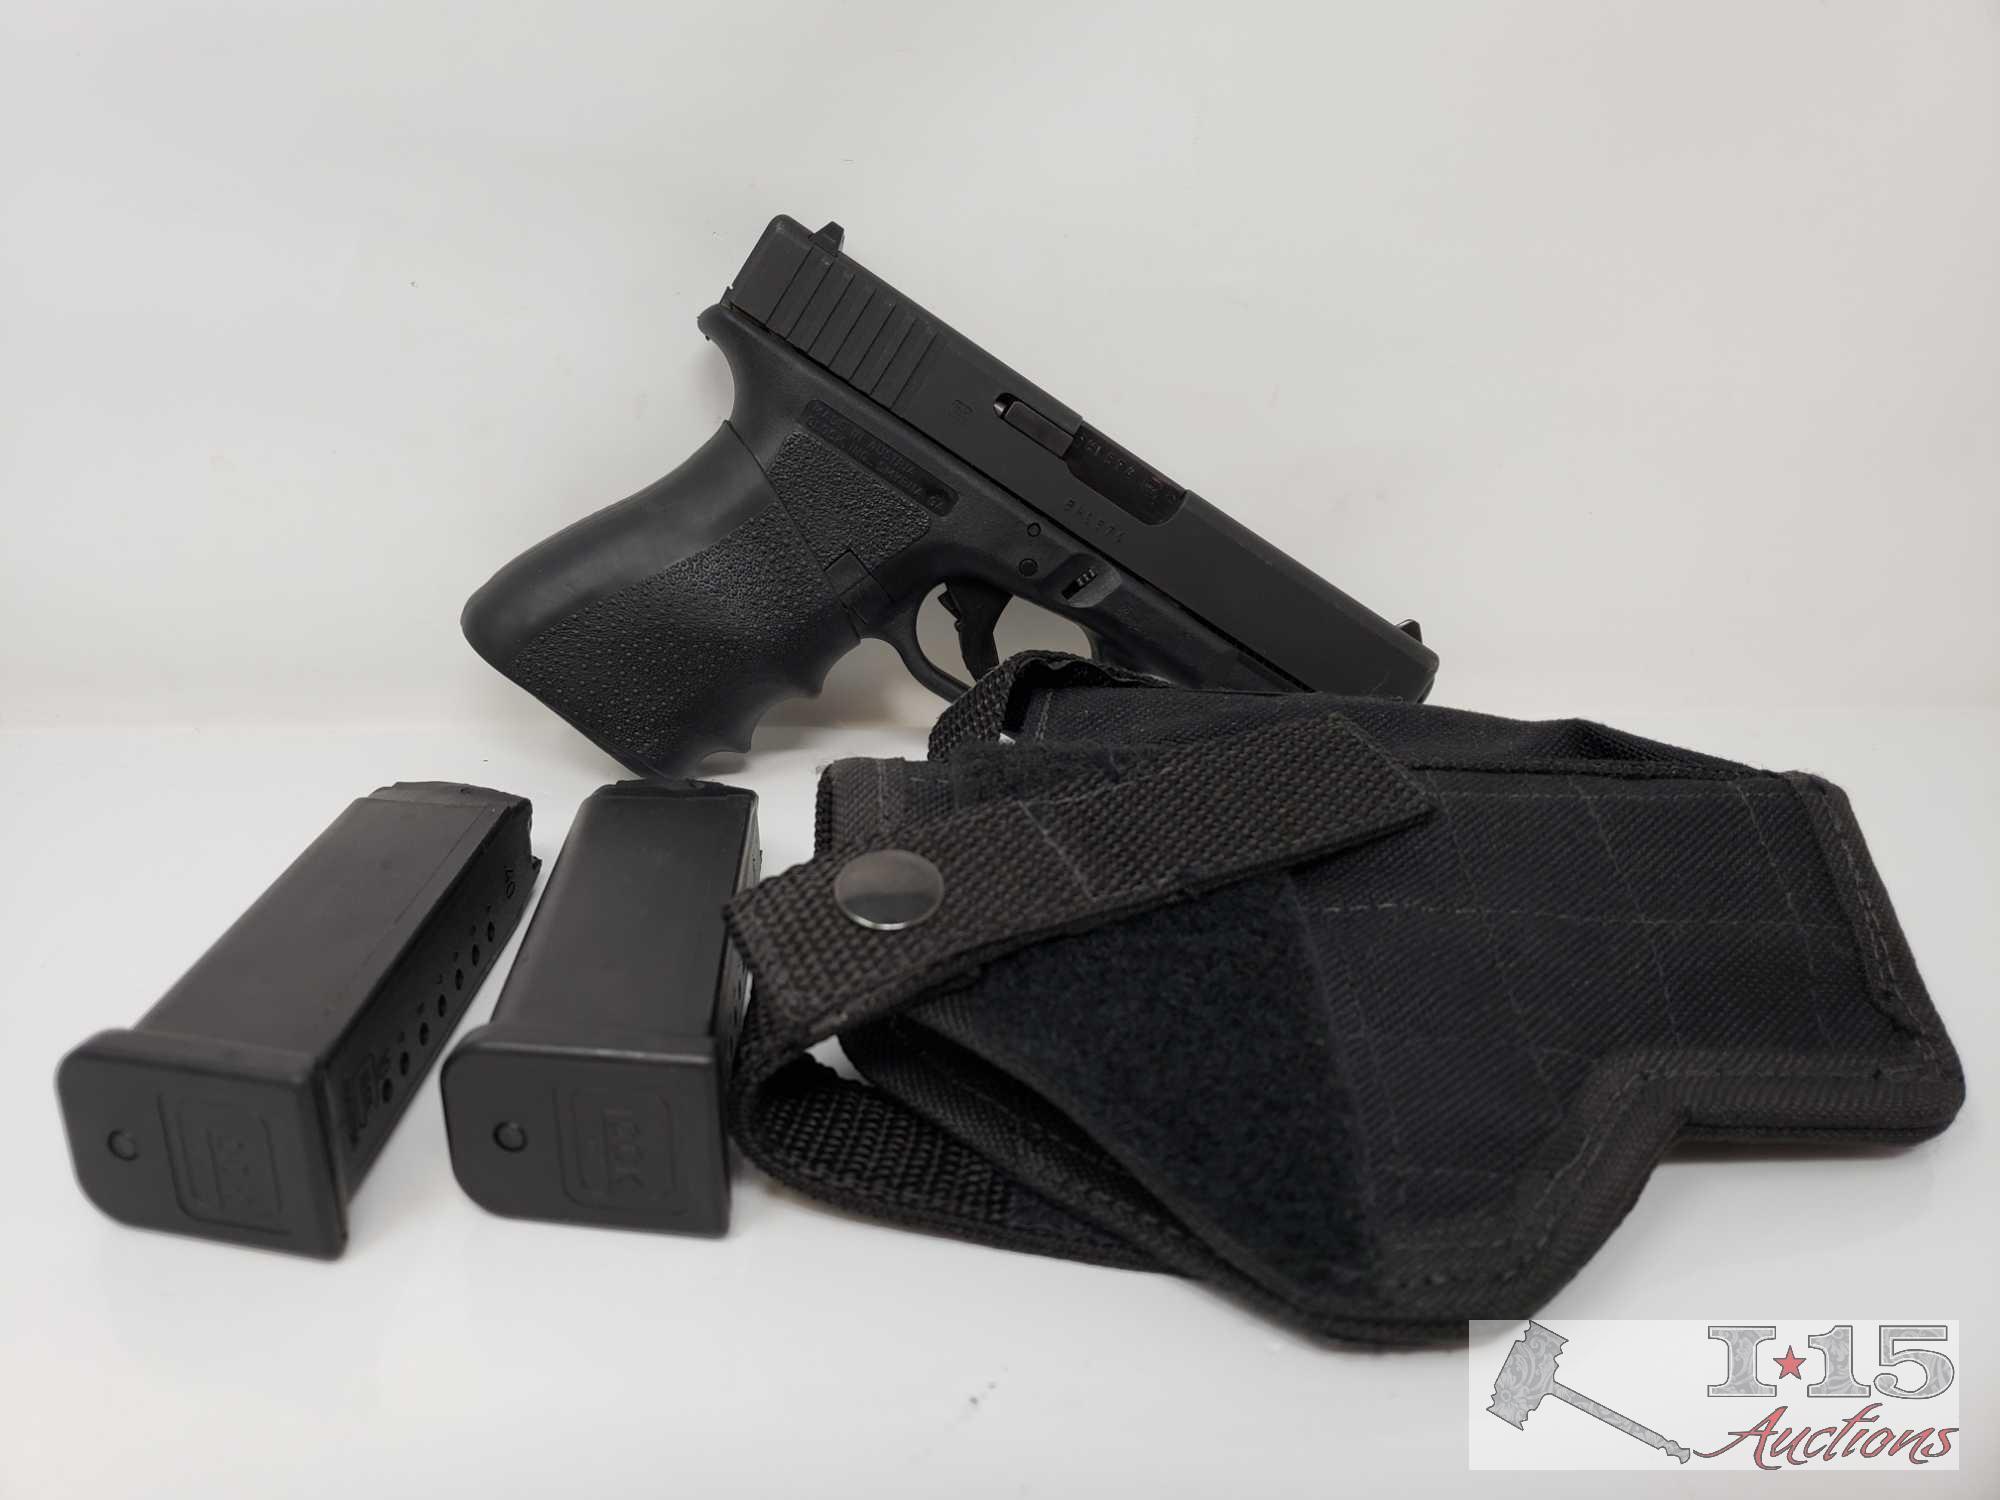 Glock 23 Semi-Auto .40 S&W Pistol with 2 Mags and Holster